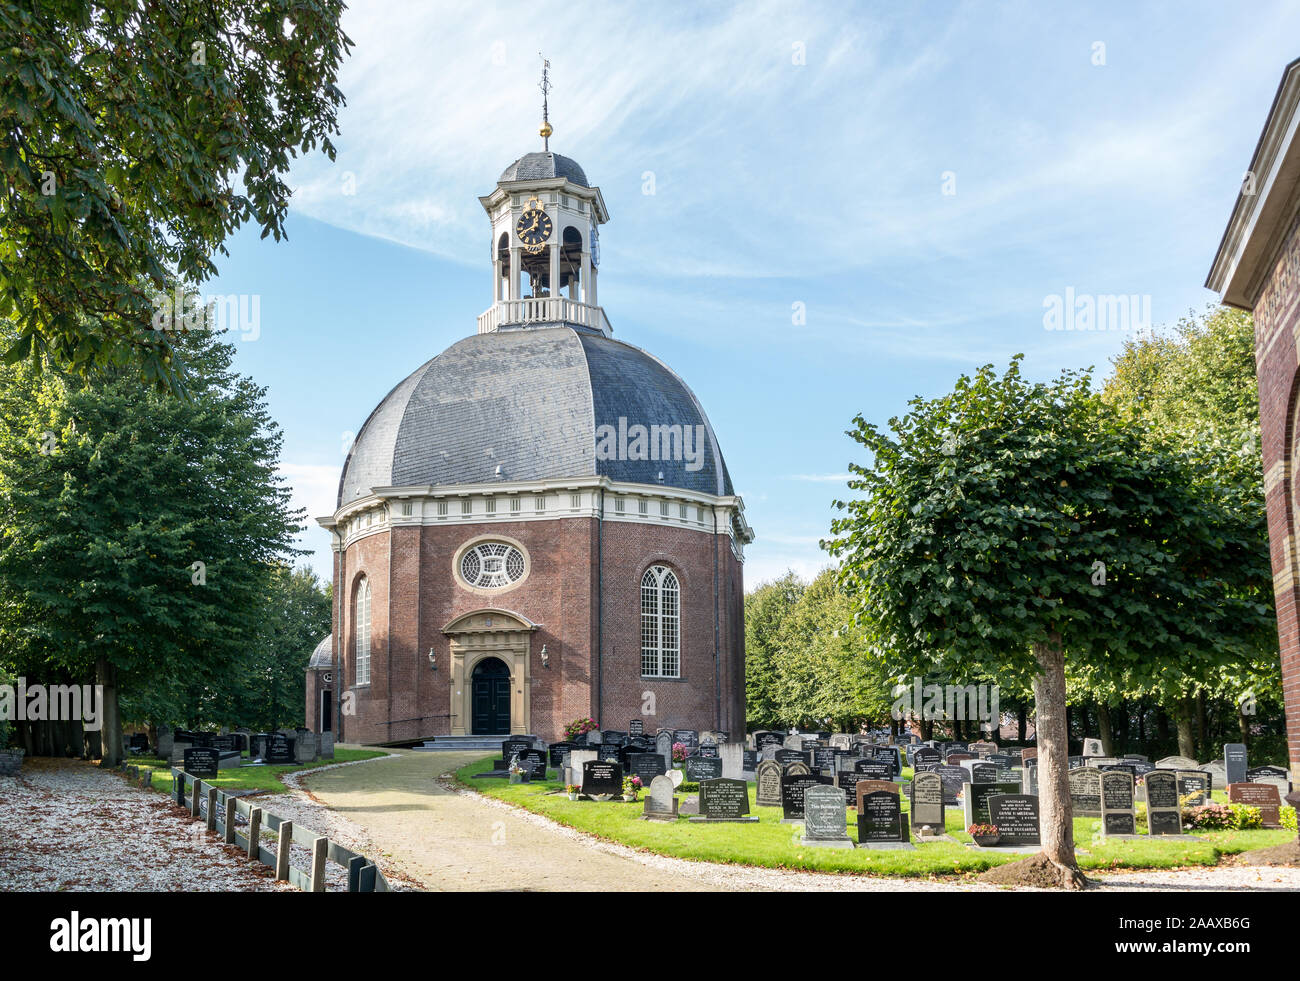 Dome church with churchyard in the Frisian town of Berlikum in Friesland, Netherlands Stock Photo